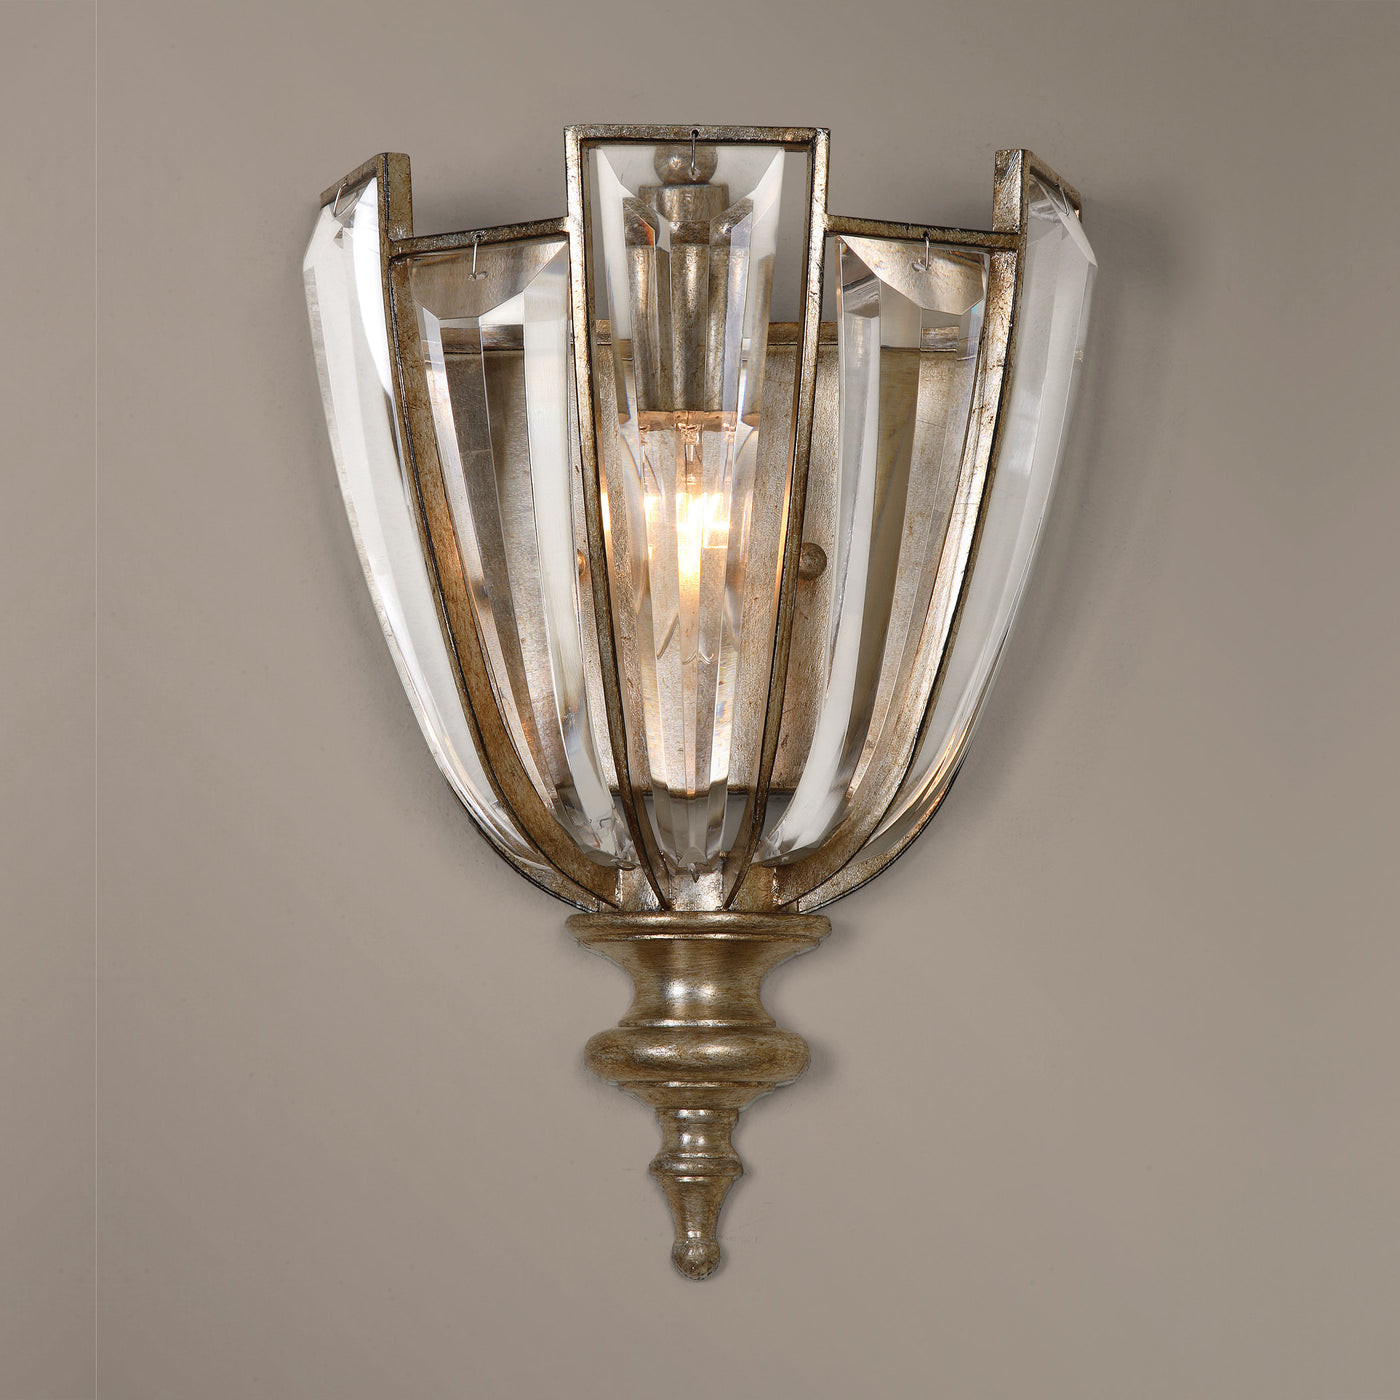 Uttermost Vicentina 1 Light Crystal Wall Sconce